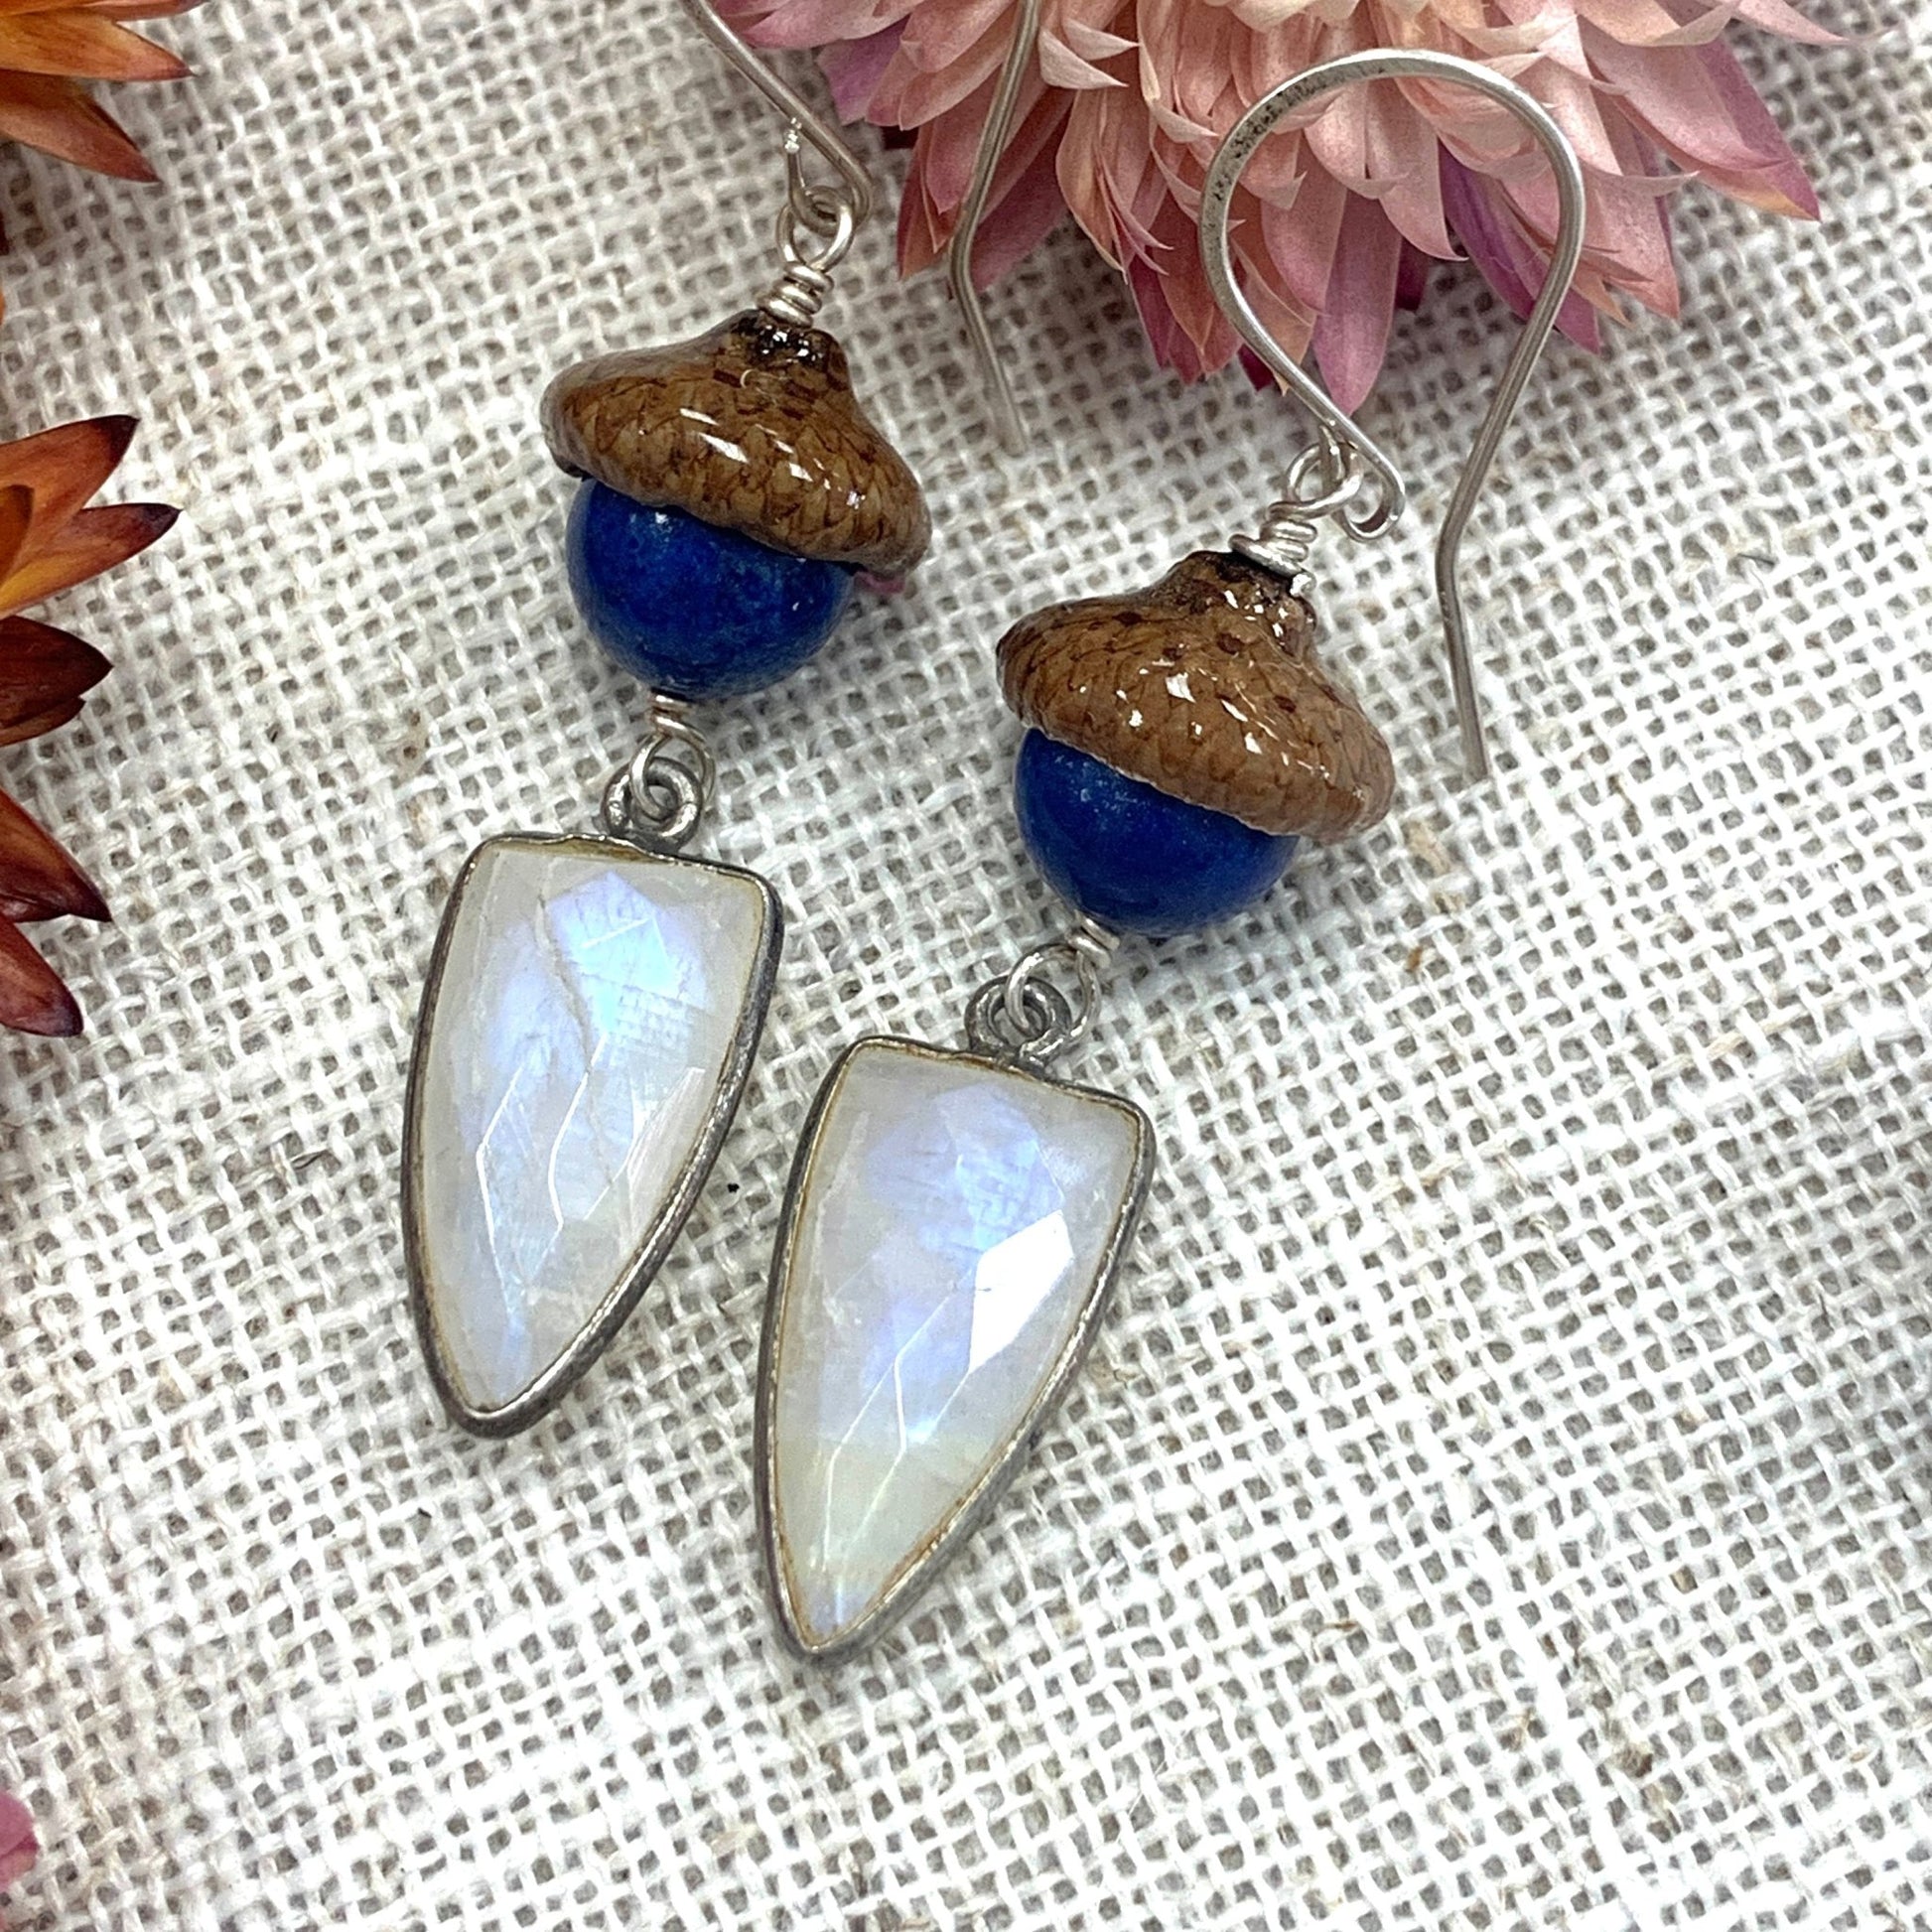 Blue Lapis and Moonstone Acorn Dangle Earrings in Silver - Coral and Vine Co